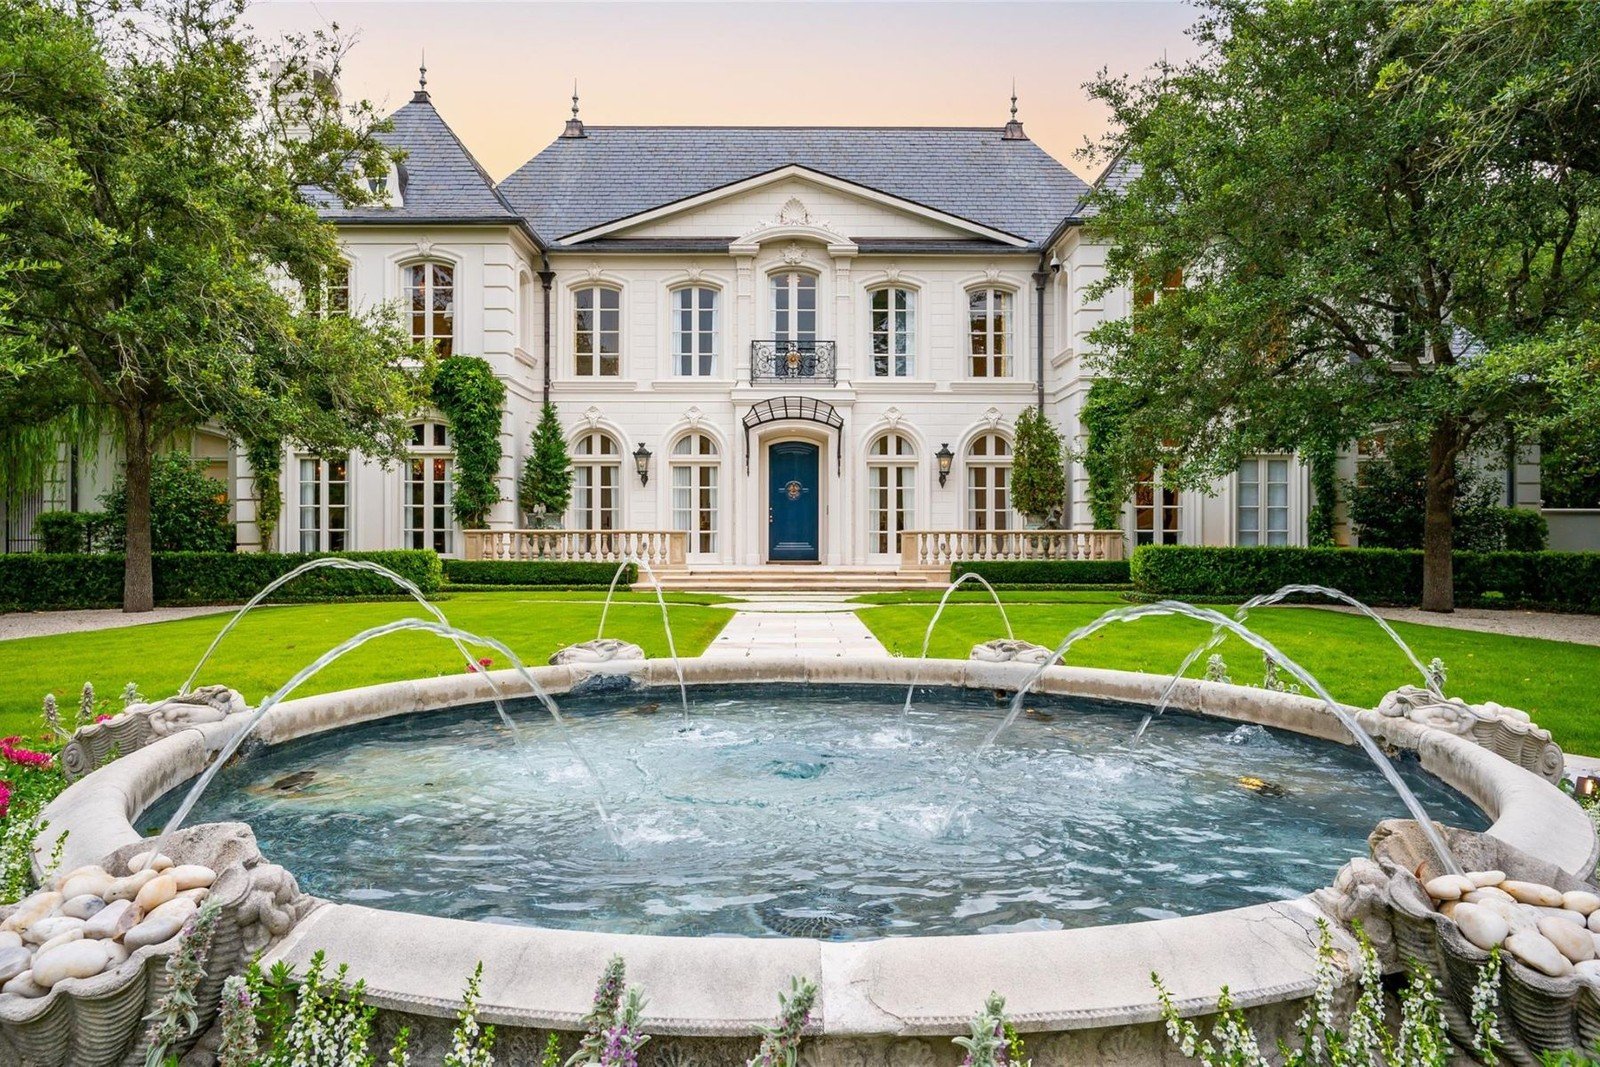 Francis York French Chateau-Style Mansion in Houston, Texas m00013.jpeg